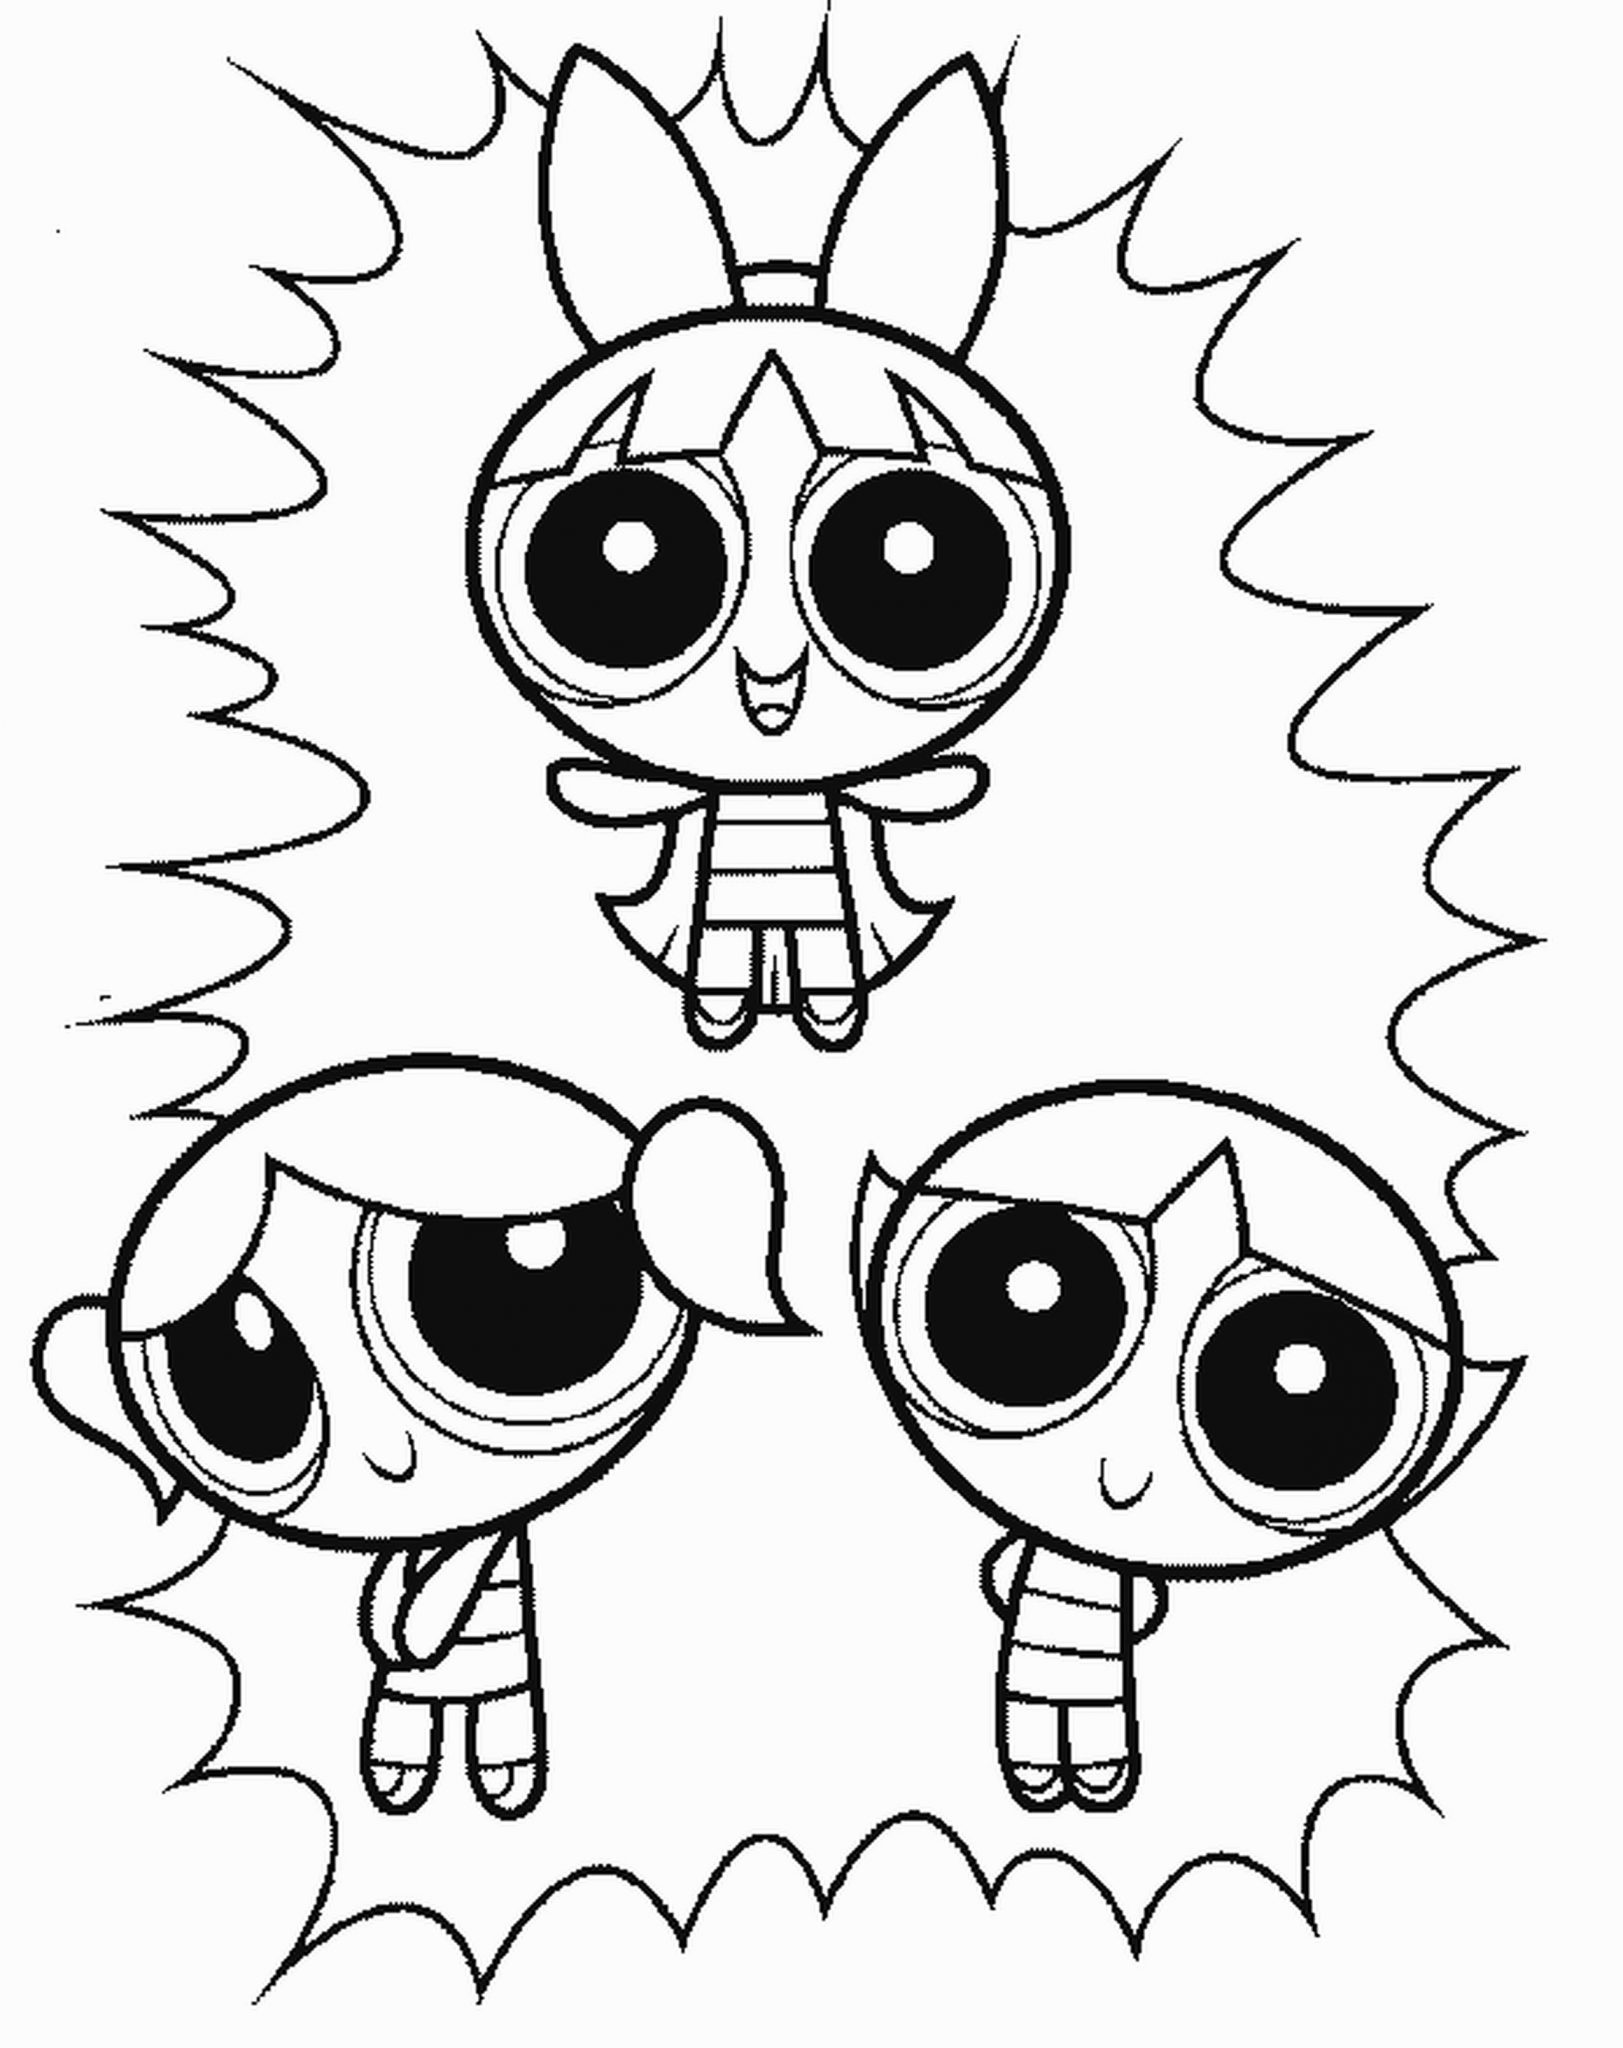 Print & Download   Coloring Pages for Girls, Recommend a Hobby To ...